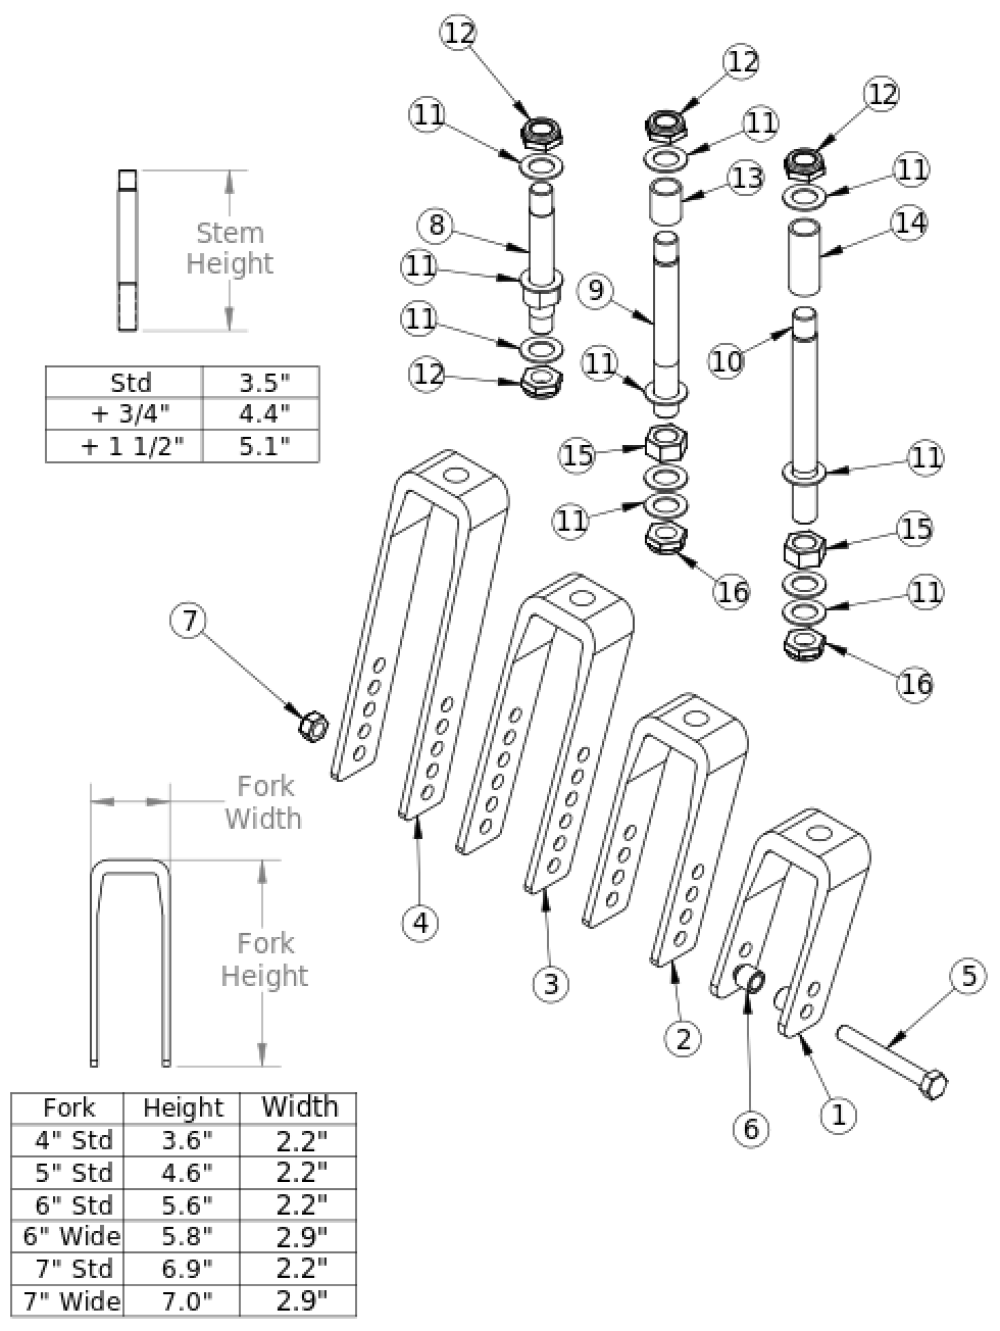 Catalyst Caster Forks And Stems parts diagram